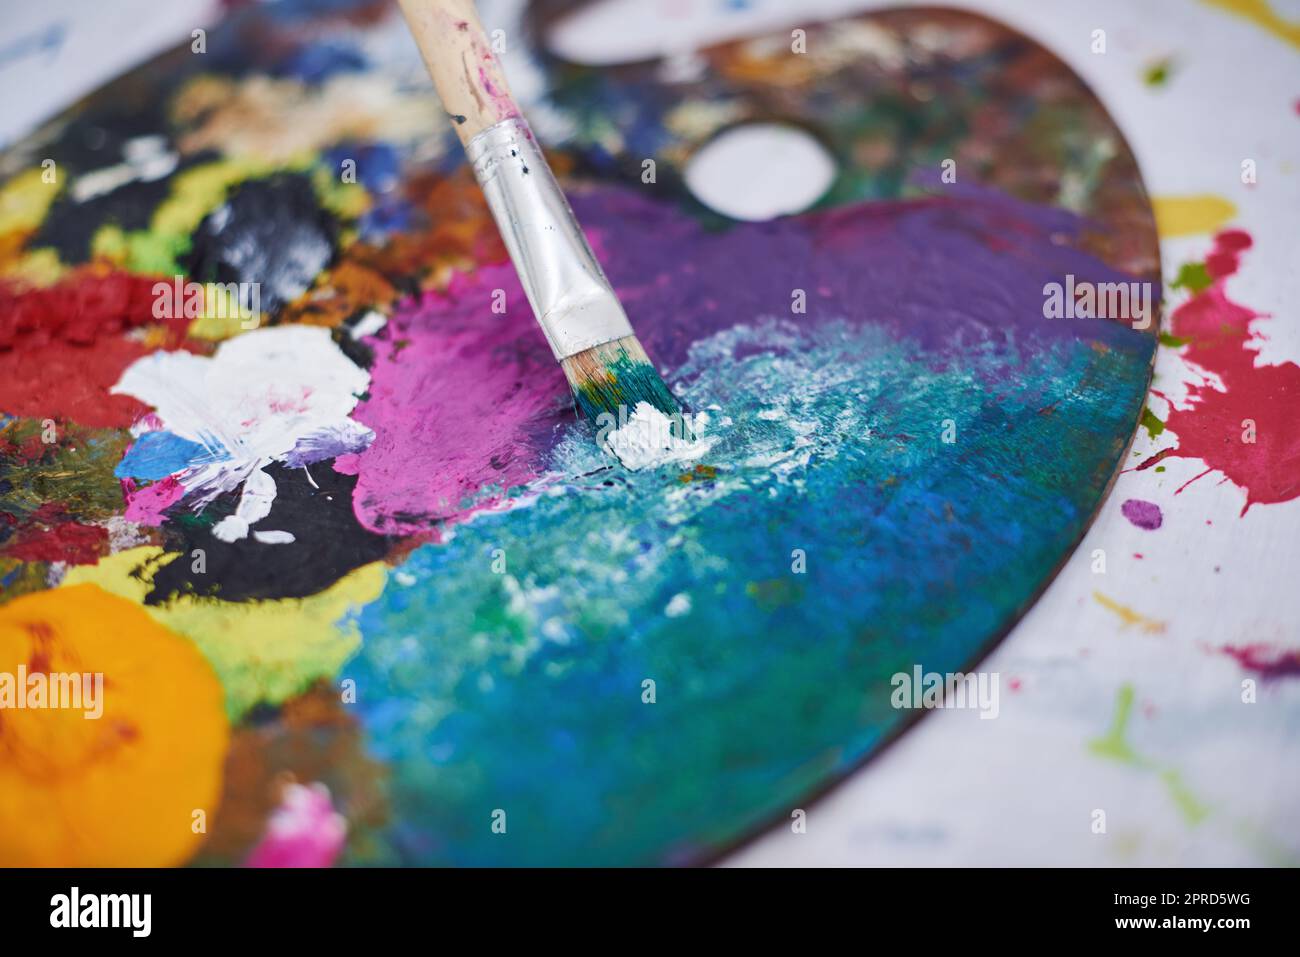 We live in a colorful world. Still life shot of a paintbrush and a used artists palette. Stock Photo